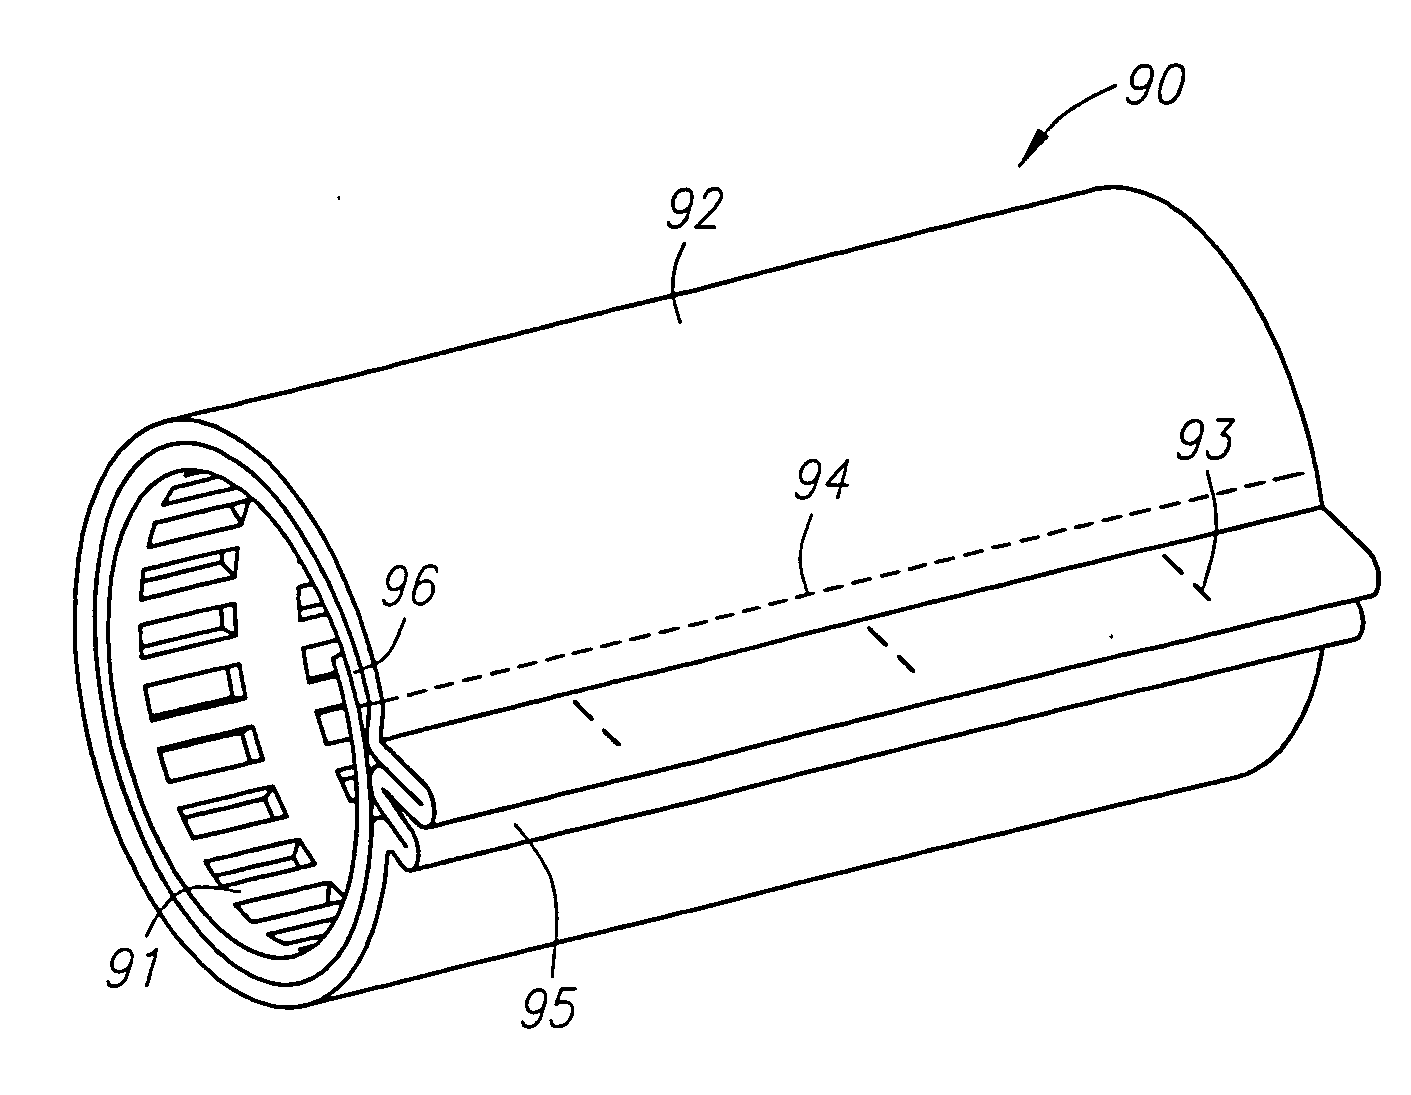 Coiled sheet graft for single and bifurcated lumens and methods of making and use